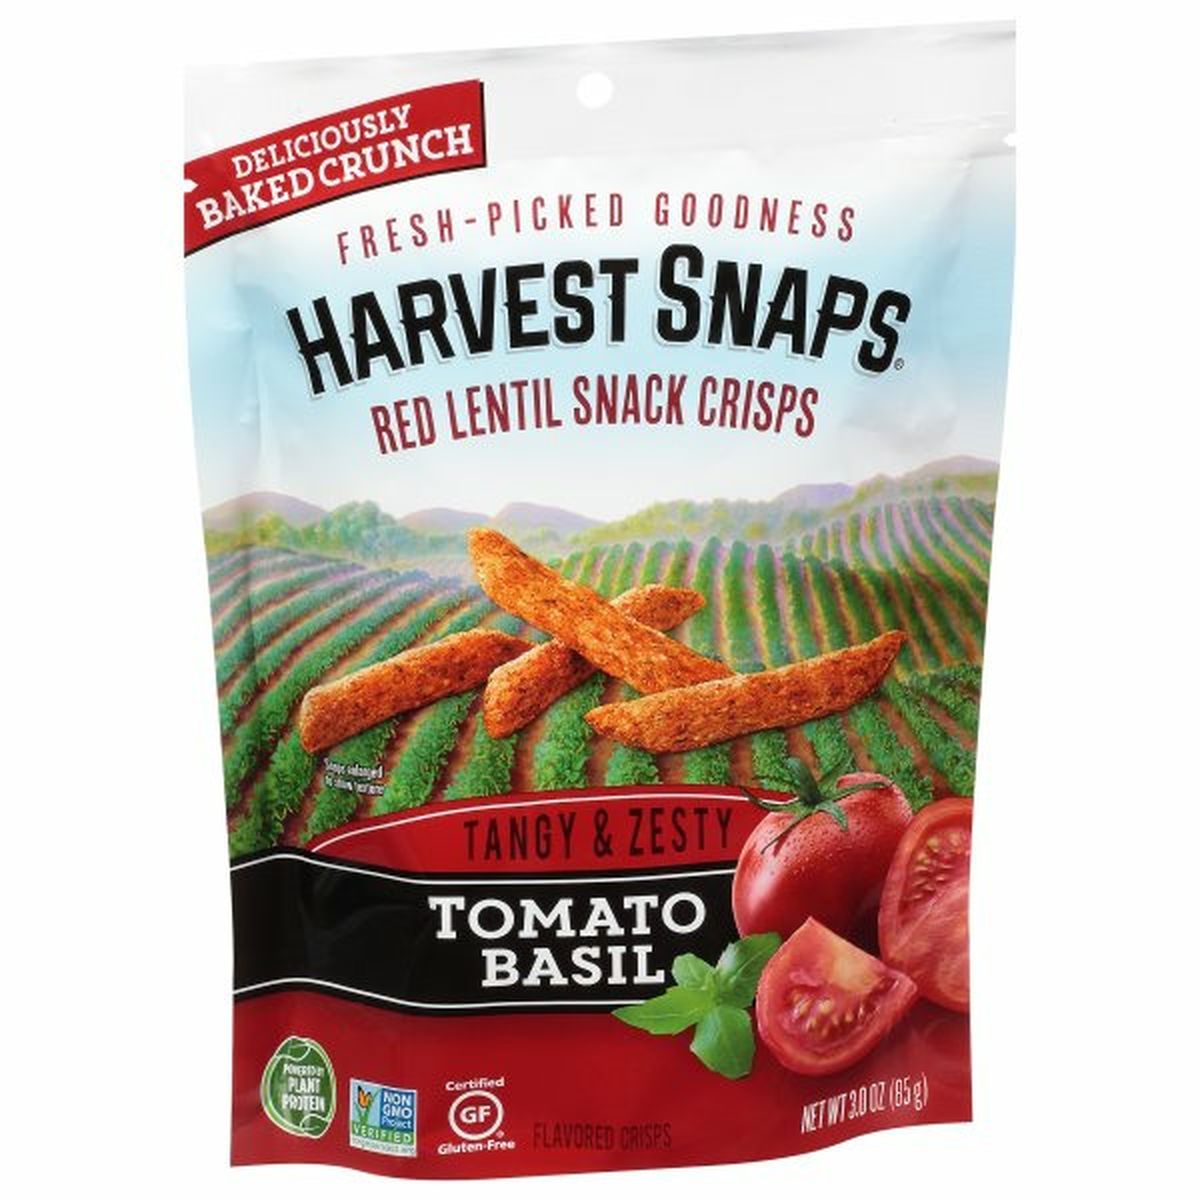 Calories in Harvest Snaps Red Lentil Snack Crisps, Tomato Basil, Tangy & Zesty